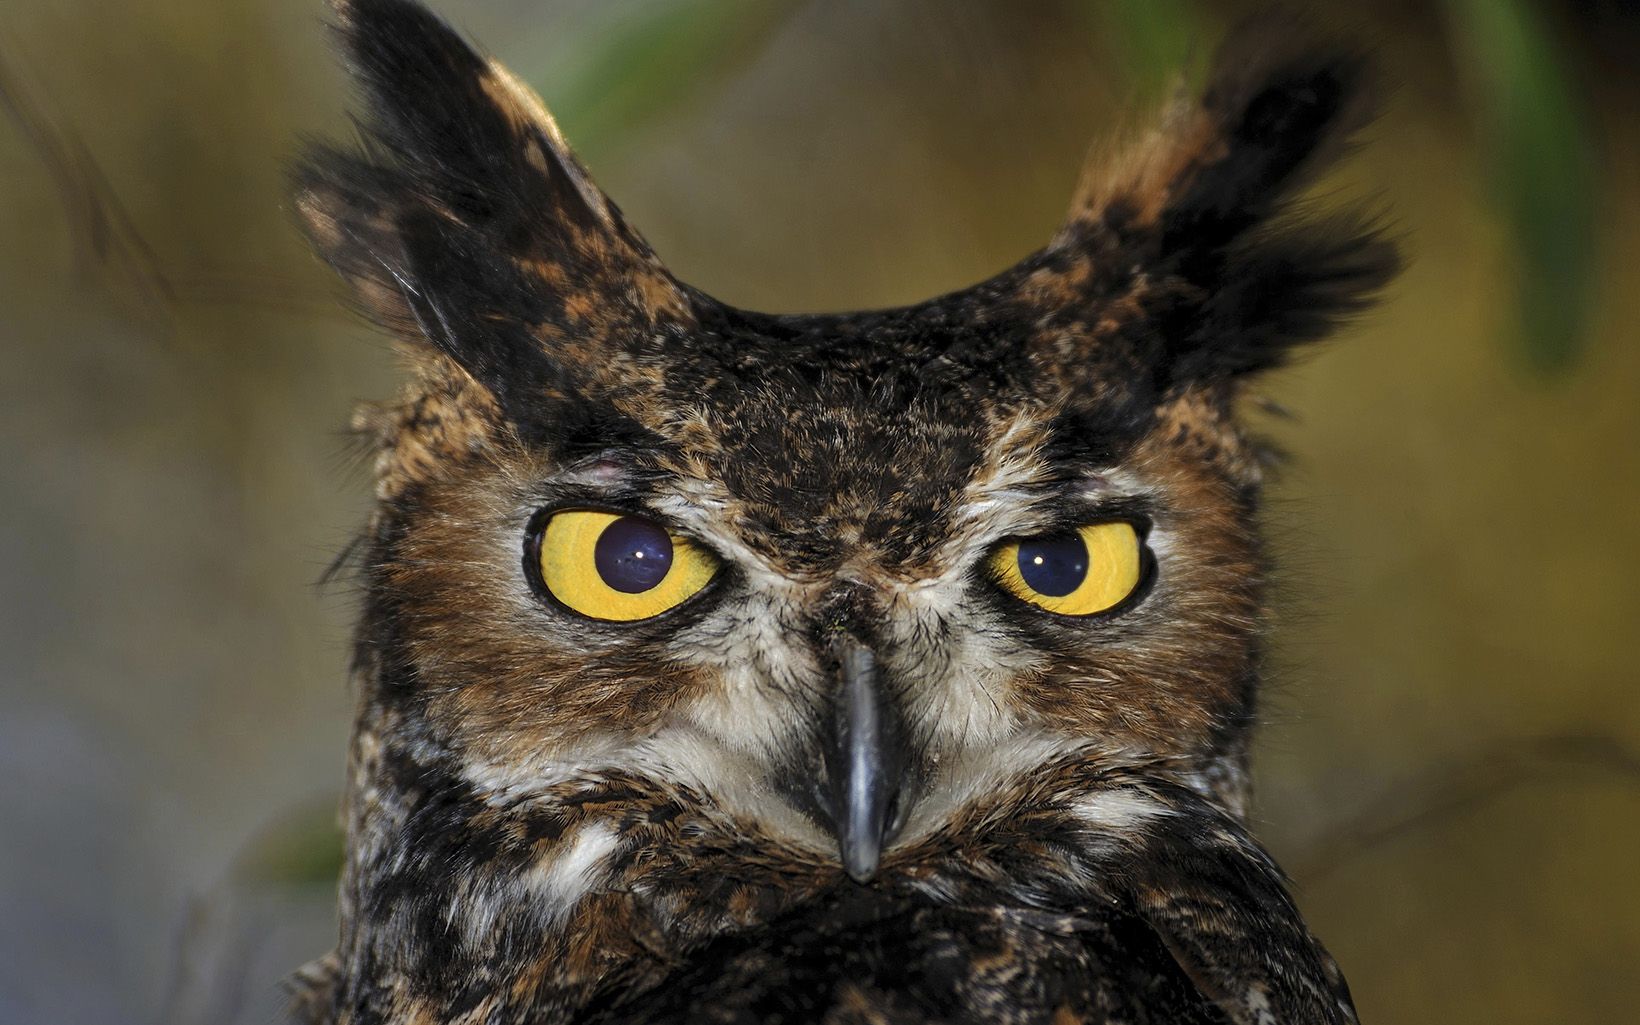 A head shot of a brown owl shows off its yellow eyes.